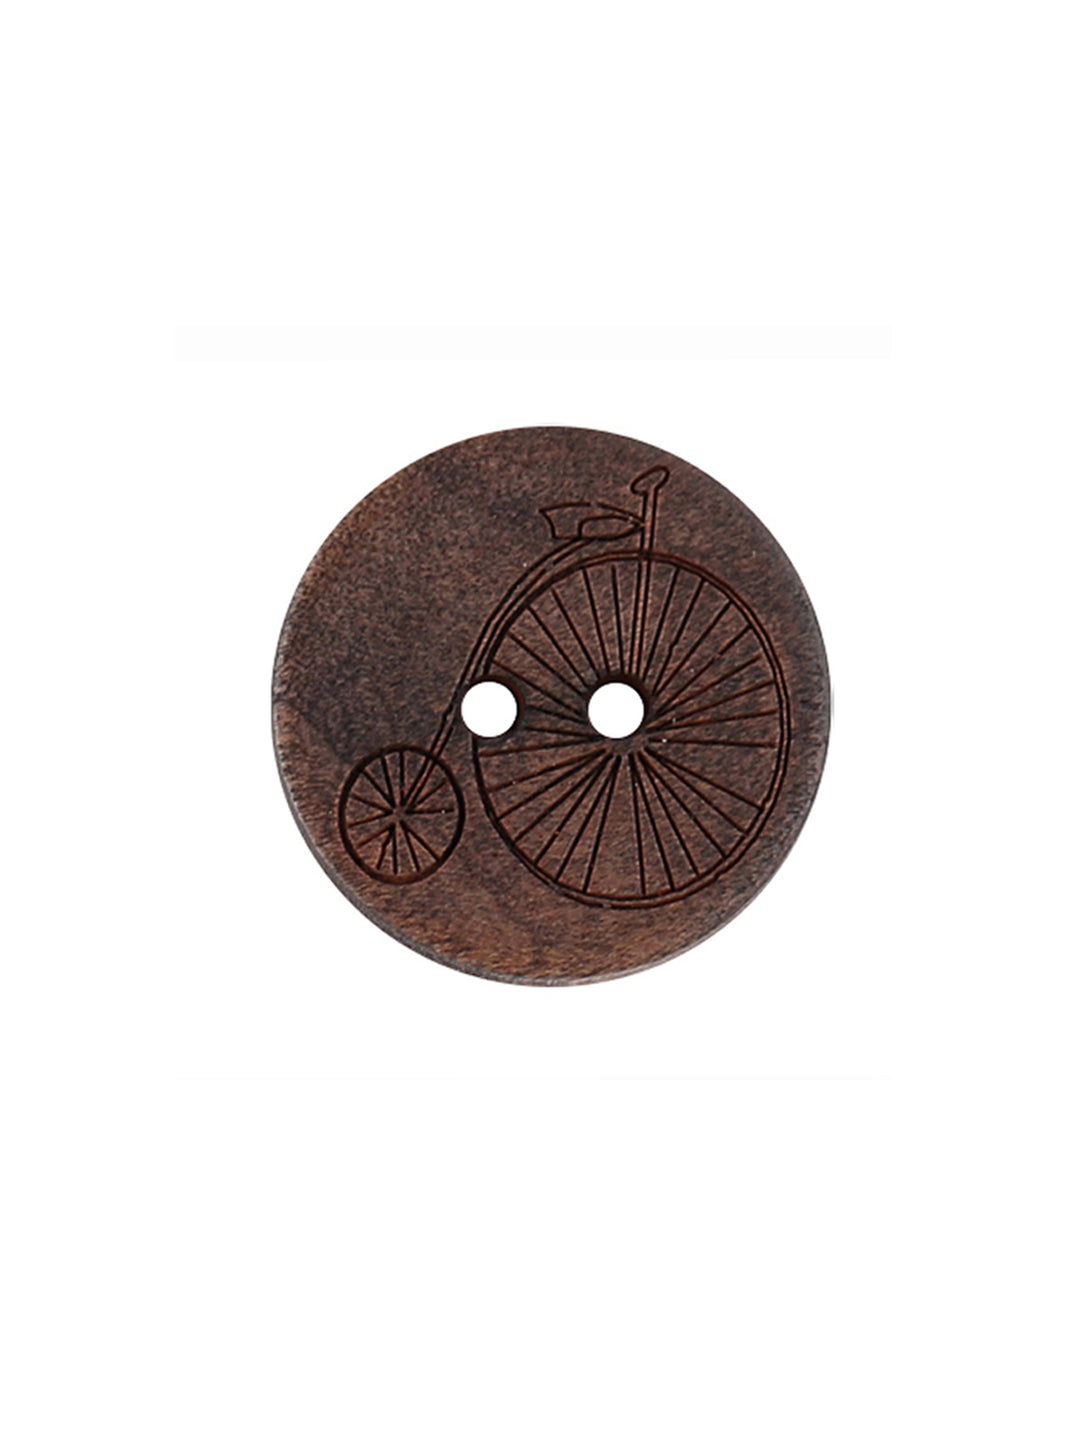 Classic Cycle Design 2-Hole Wooden Brown Buttons